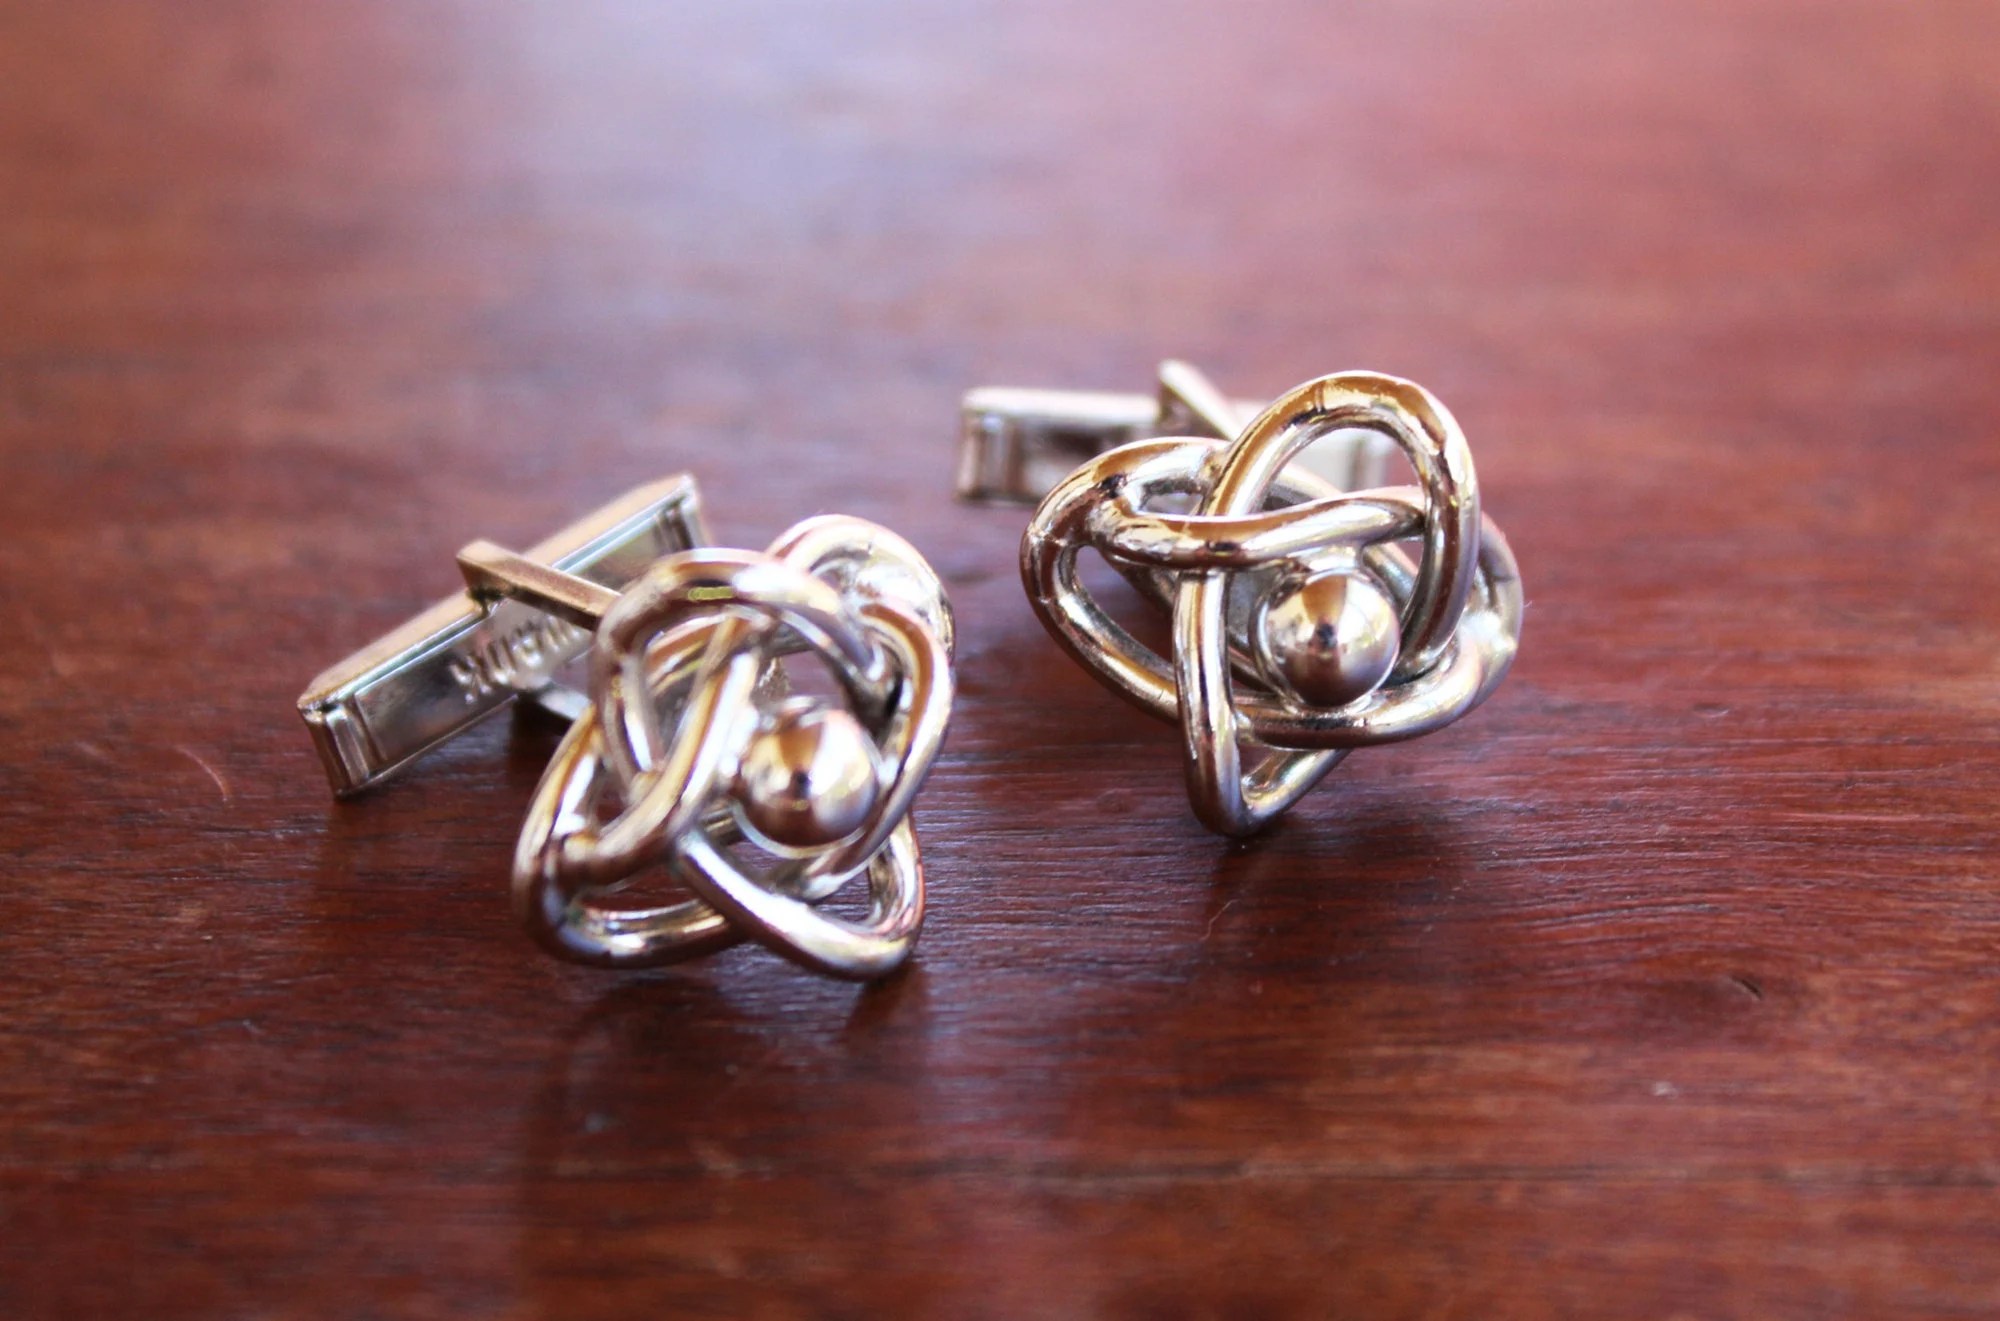 Swank Atomic Knot MCM Silver Tone Cufflinks - Vintage, Mid Century, Retro Futurism, Classic, Wedding, 1950s, Gifts for Him, Cuff Links